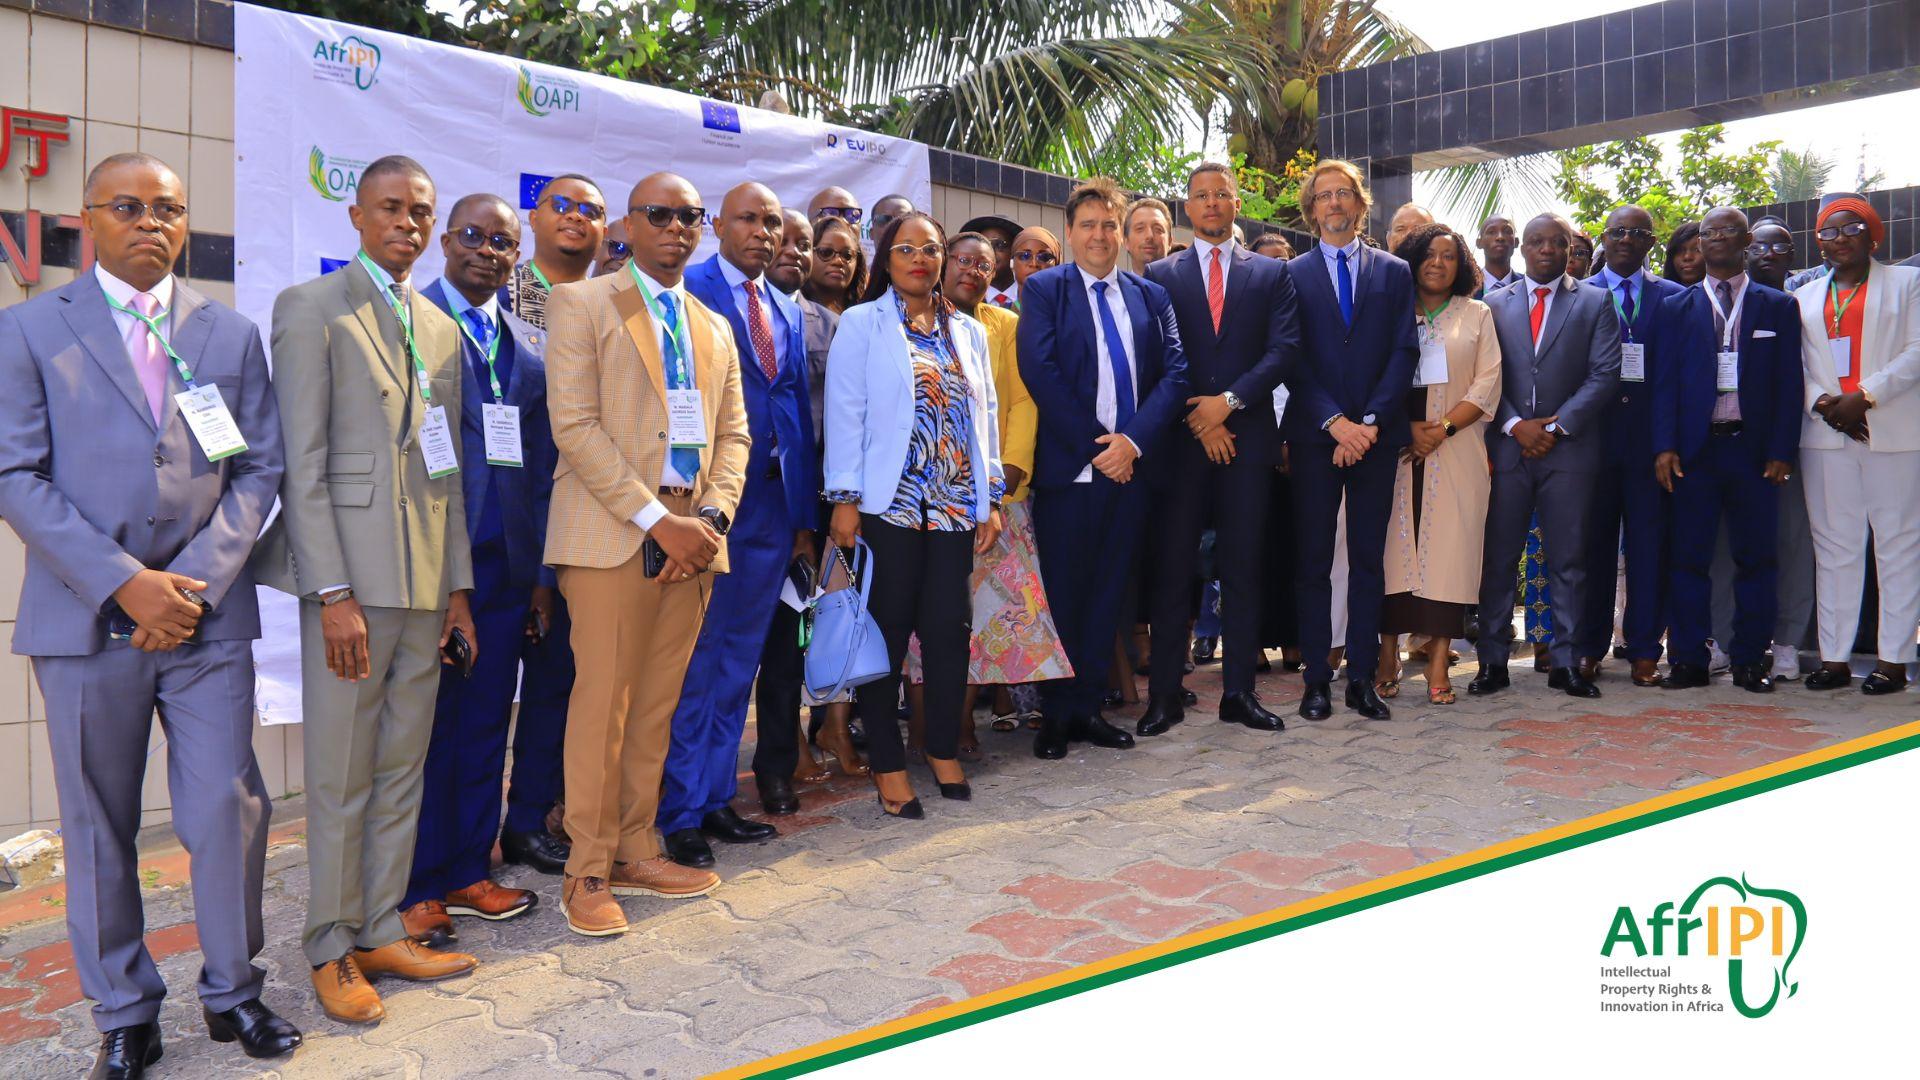 AfrIPI culminates its support for the African Network of Intellectual Property Magistrates by organising a final conference